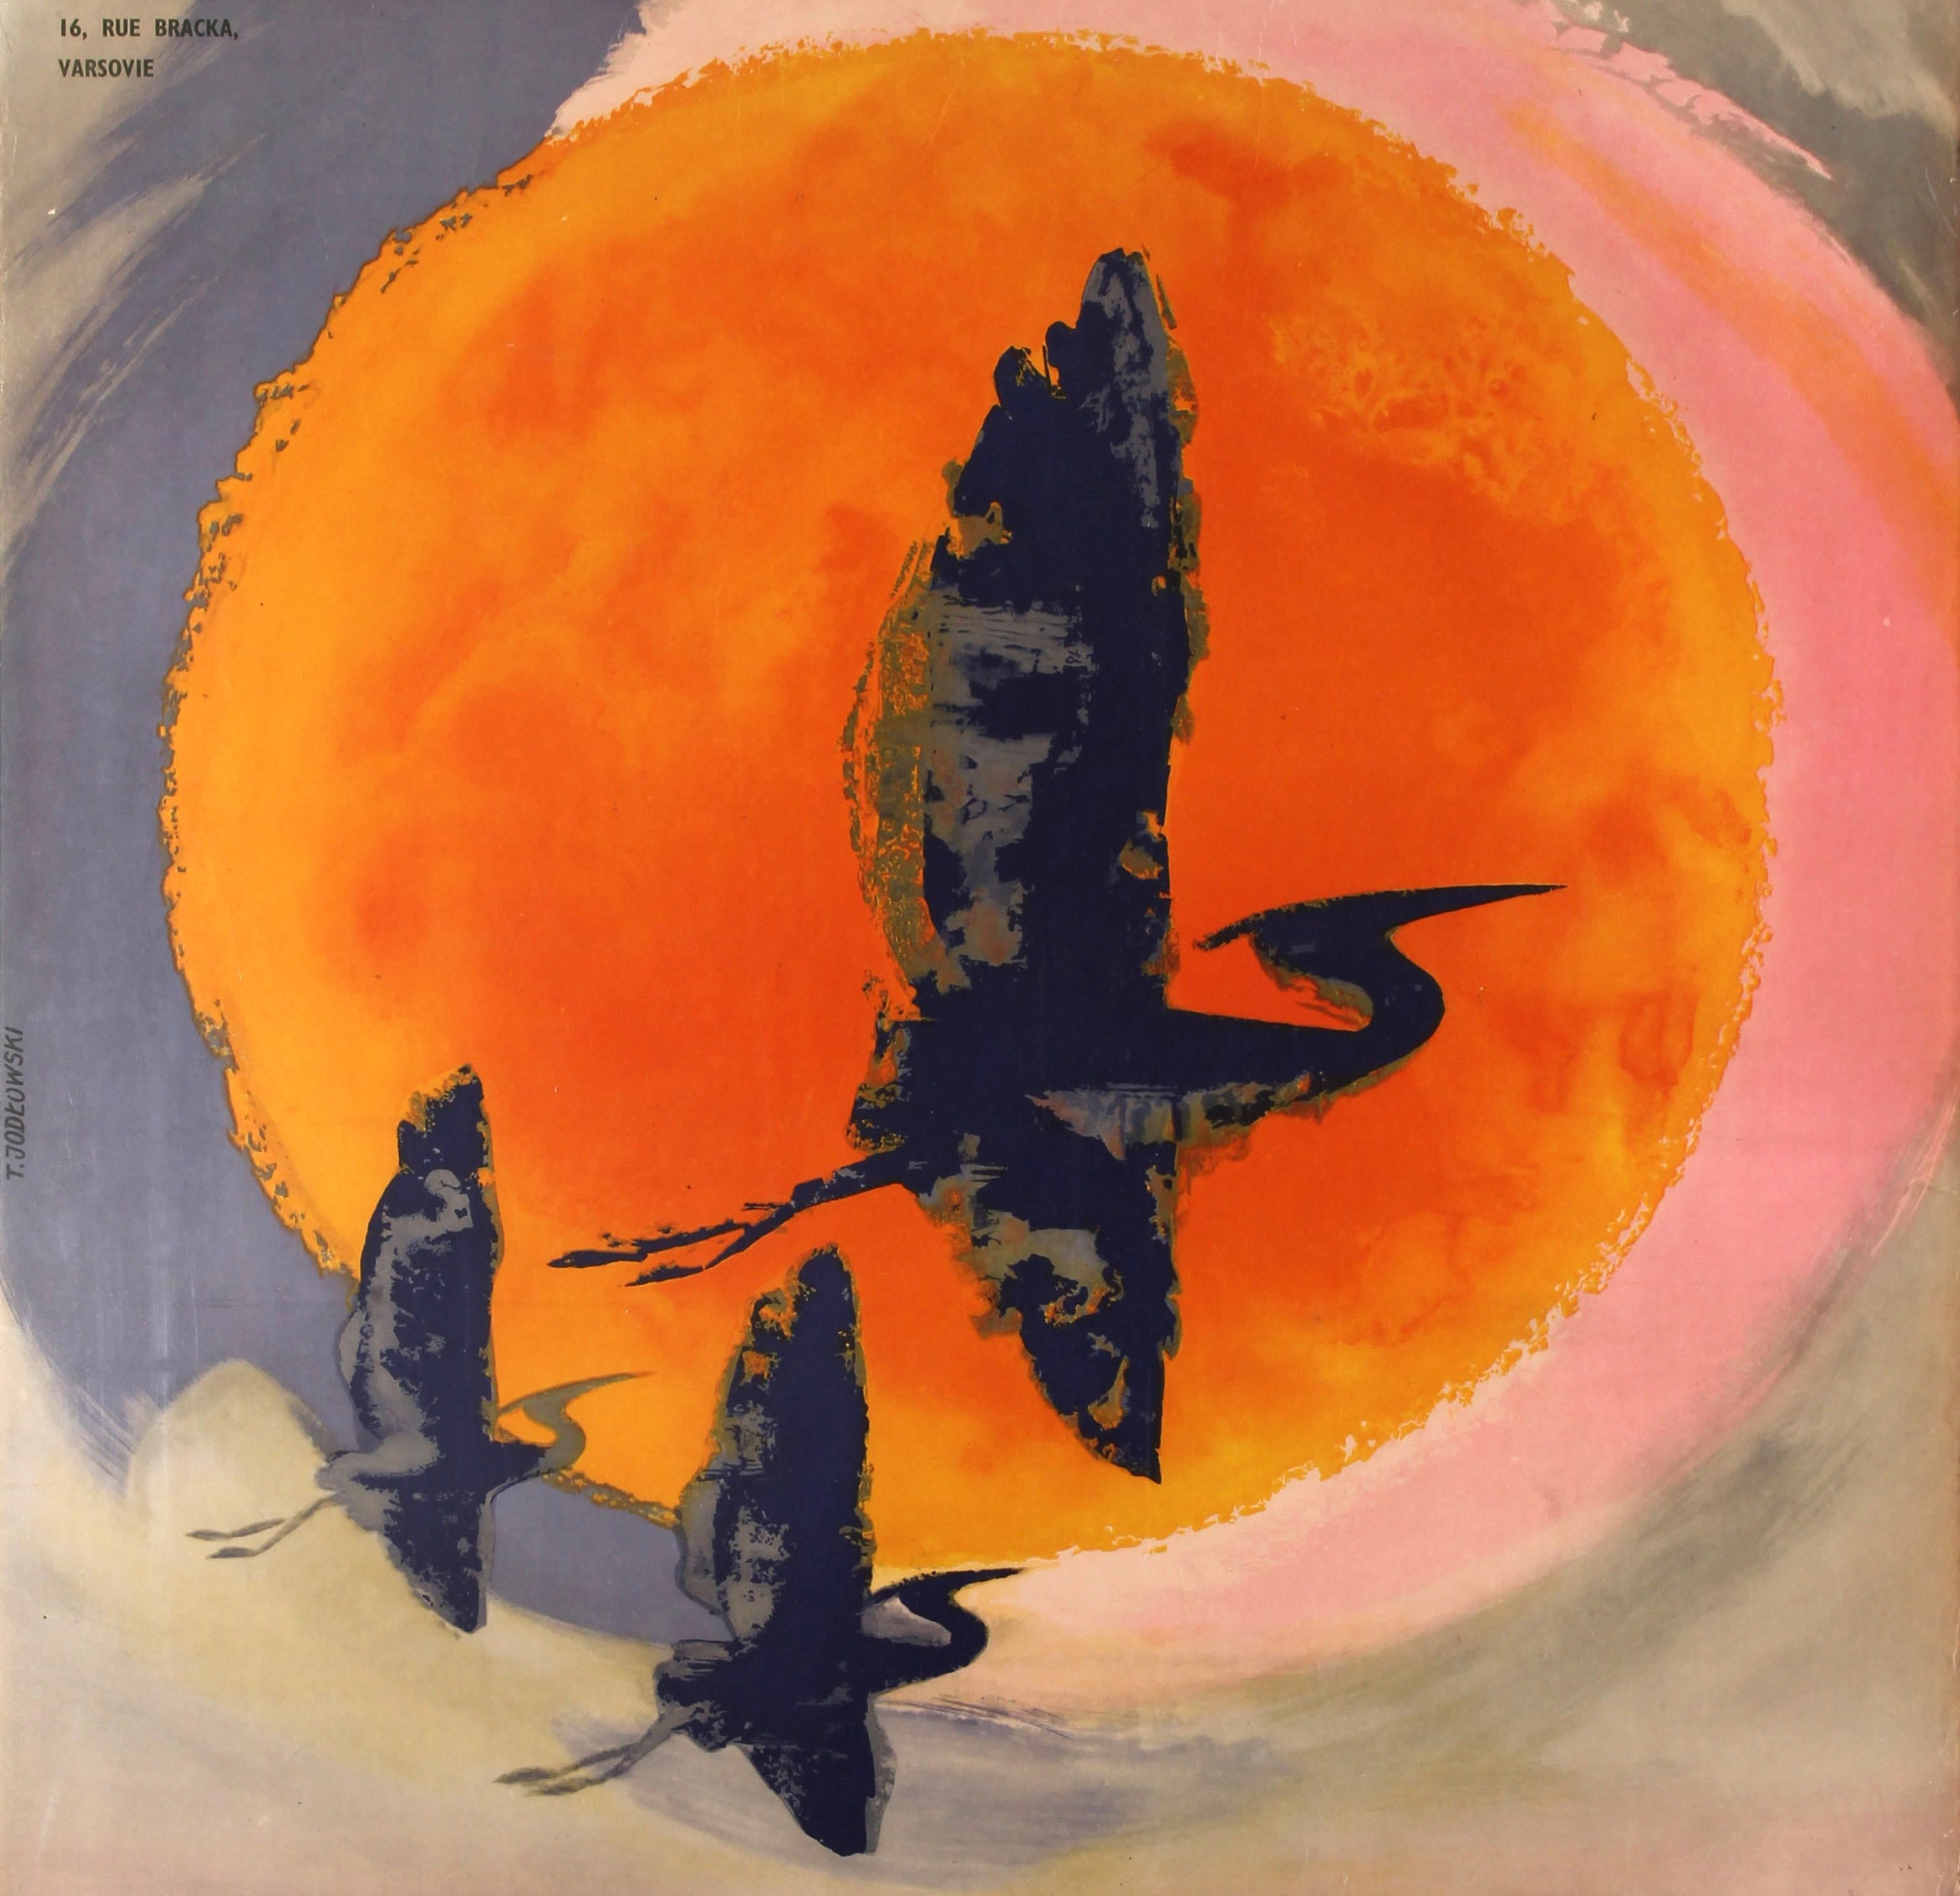 Original vintage travel poster for Poland where you can really relax / Pour vous relaxer venez en Pologne featuring stunning artwork by the Polish artist Tadeusz Jodłowski (1925-2015) depicting three birds flying in front of a blazing sun with the